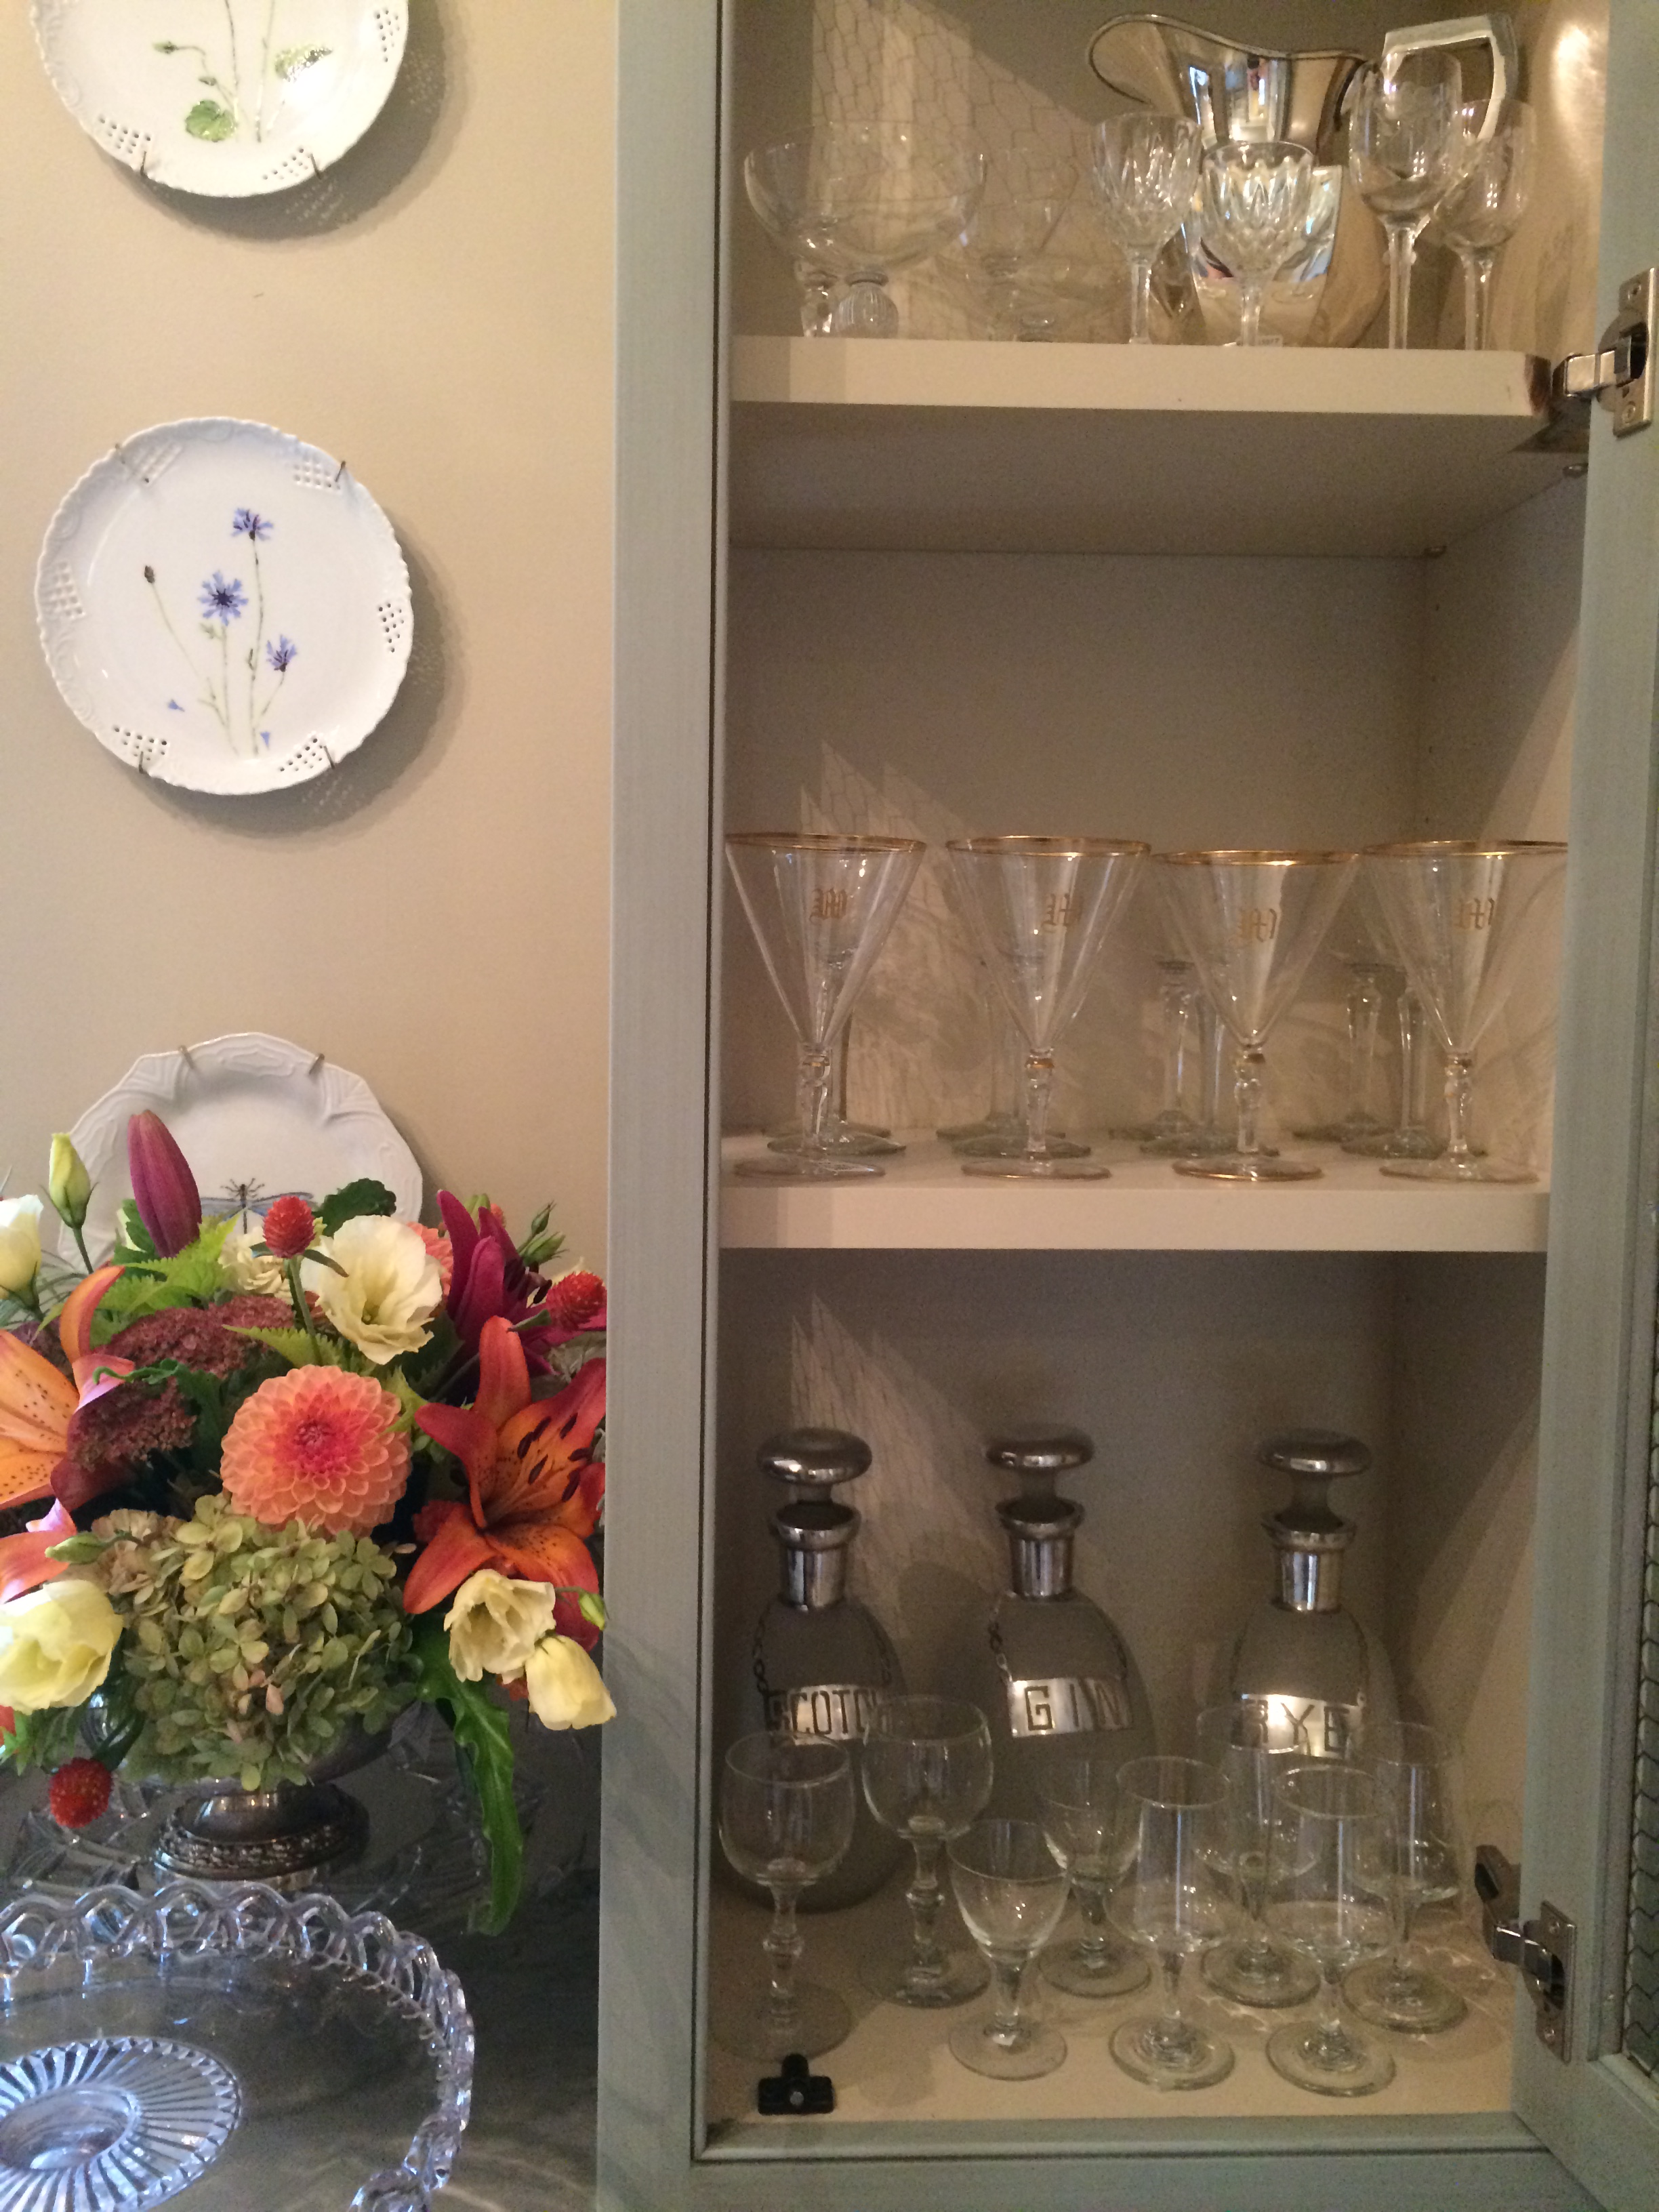 Stem and bar ware in cabinets and flowers in a vintage silver plate flower arrangers.